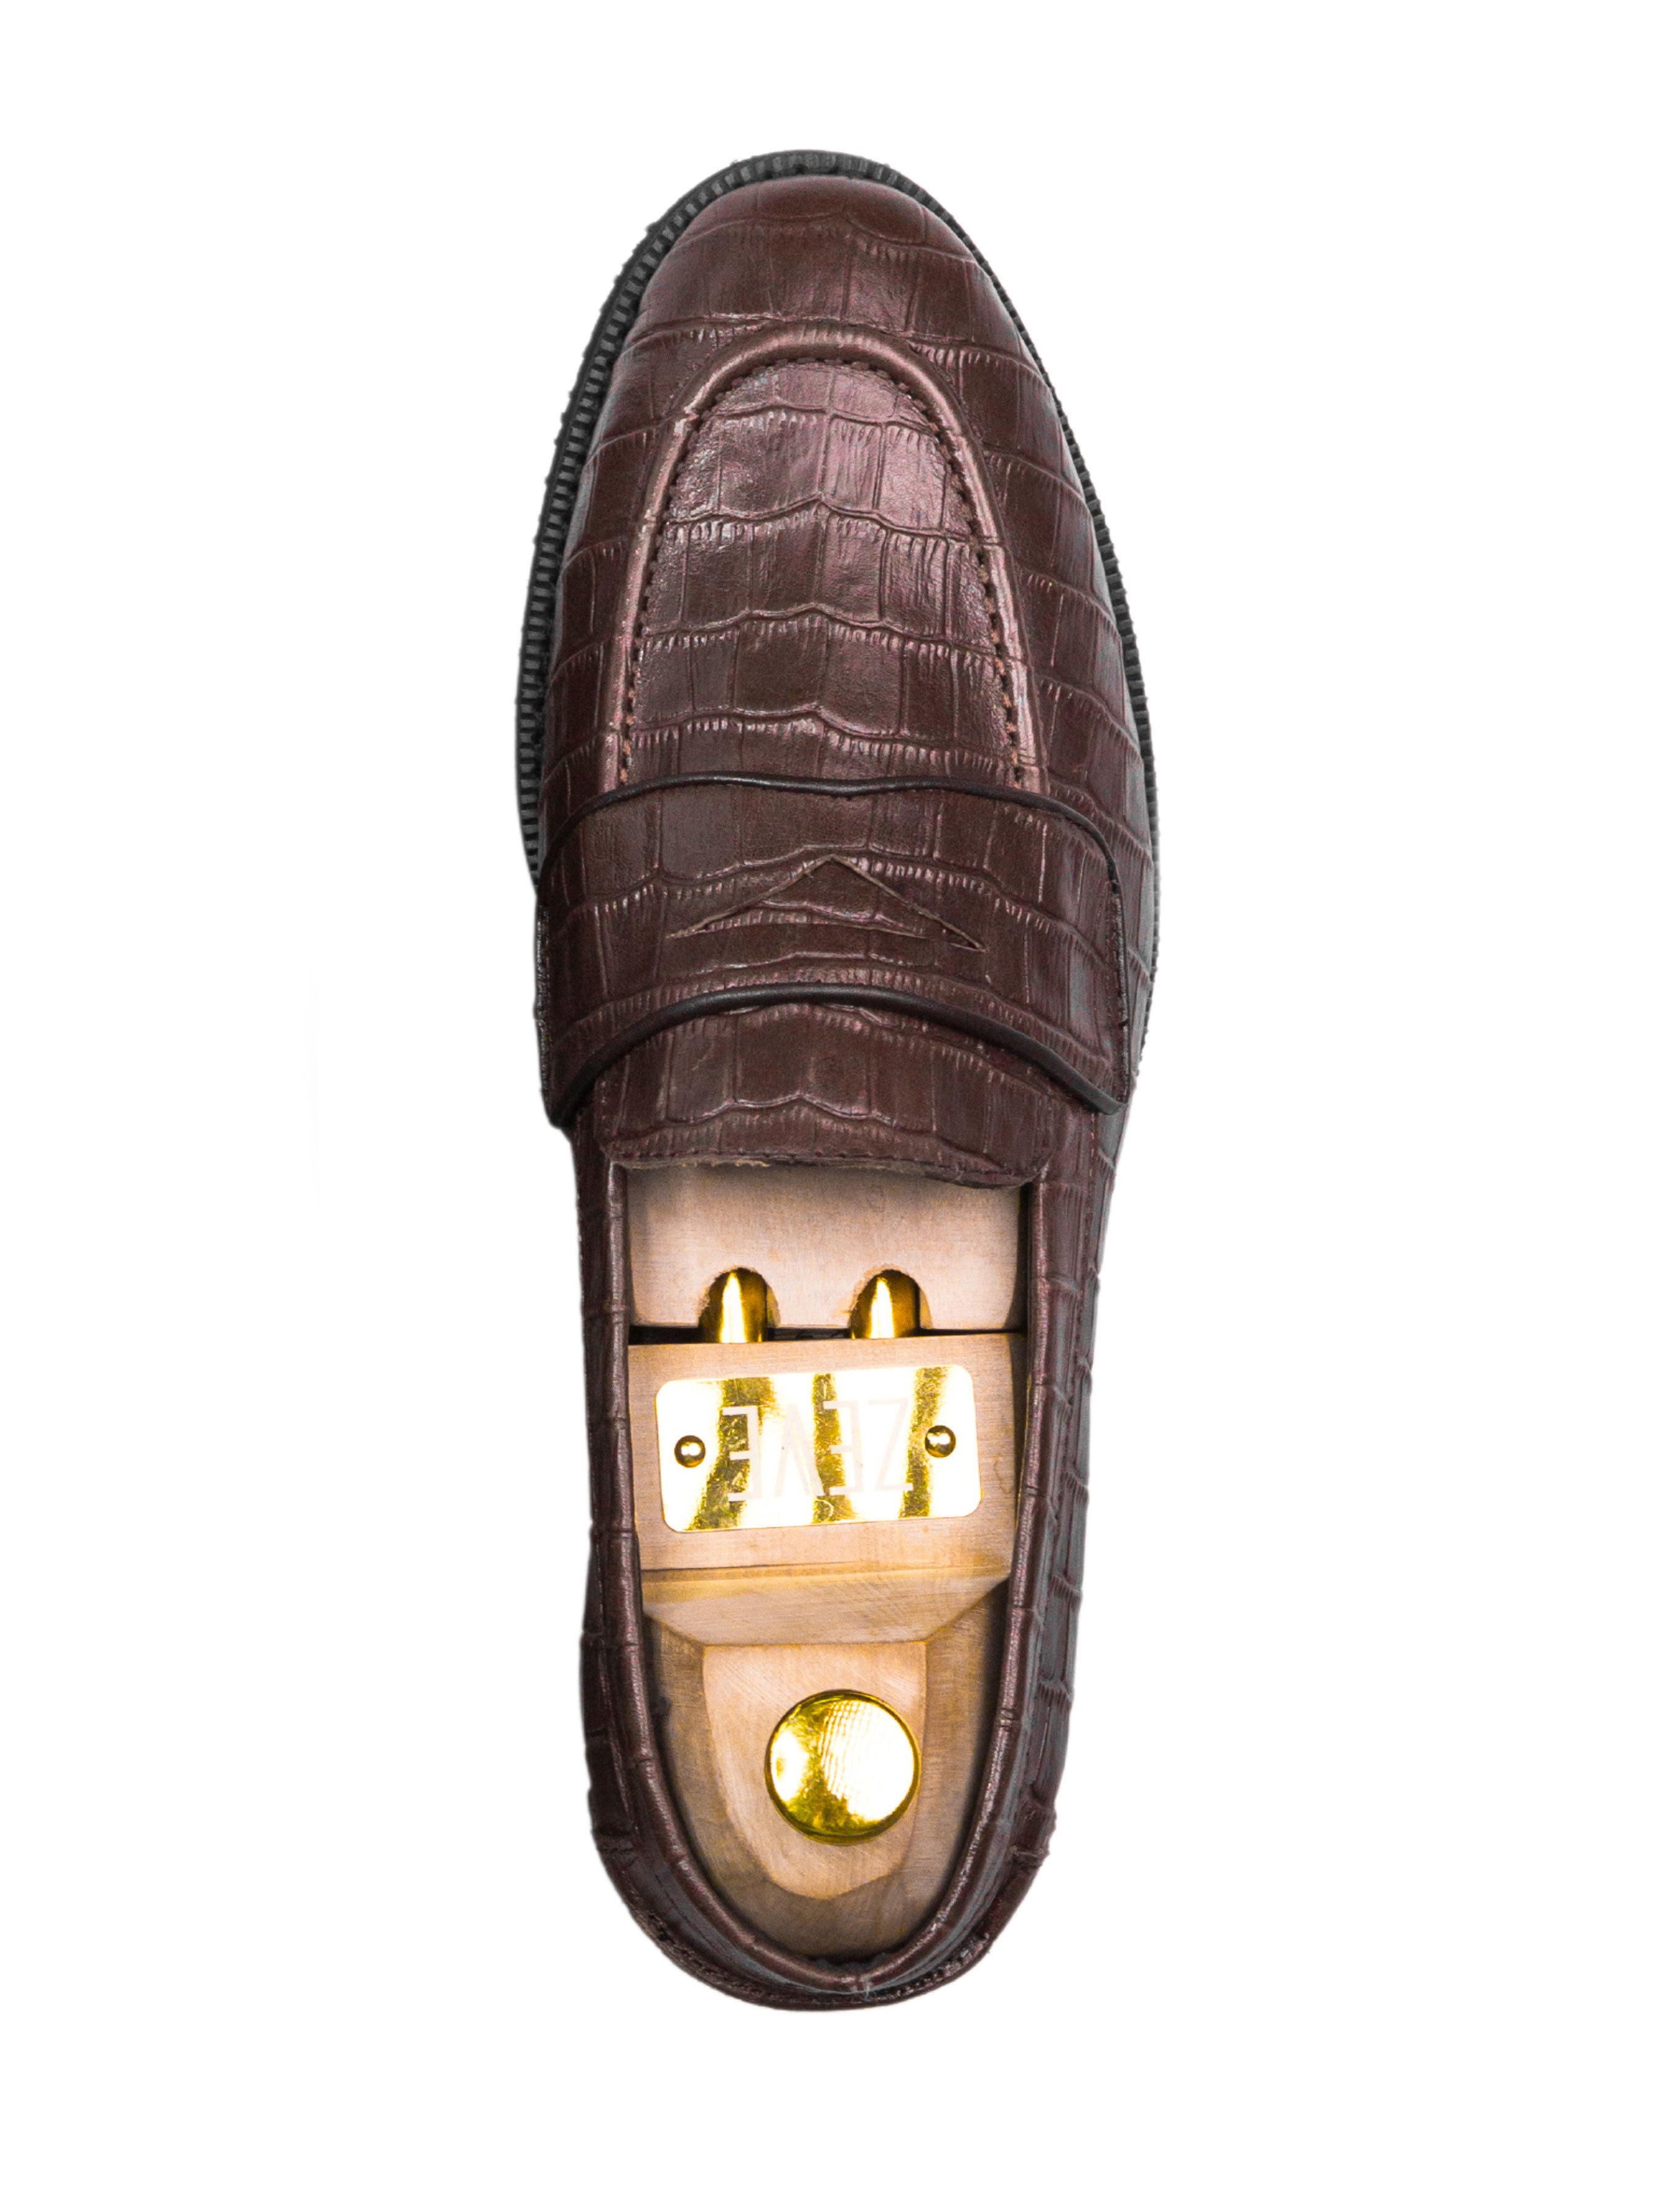 Wayne Penny Loafer - Coffee Croco Leather (Crepe Sole) - Zeve Shoes